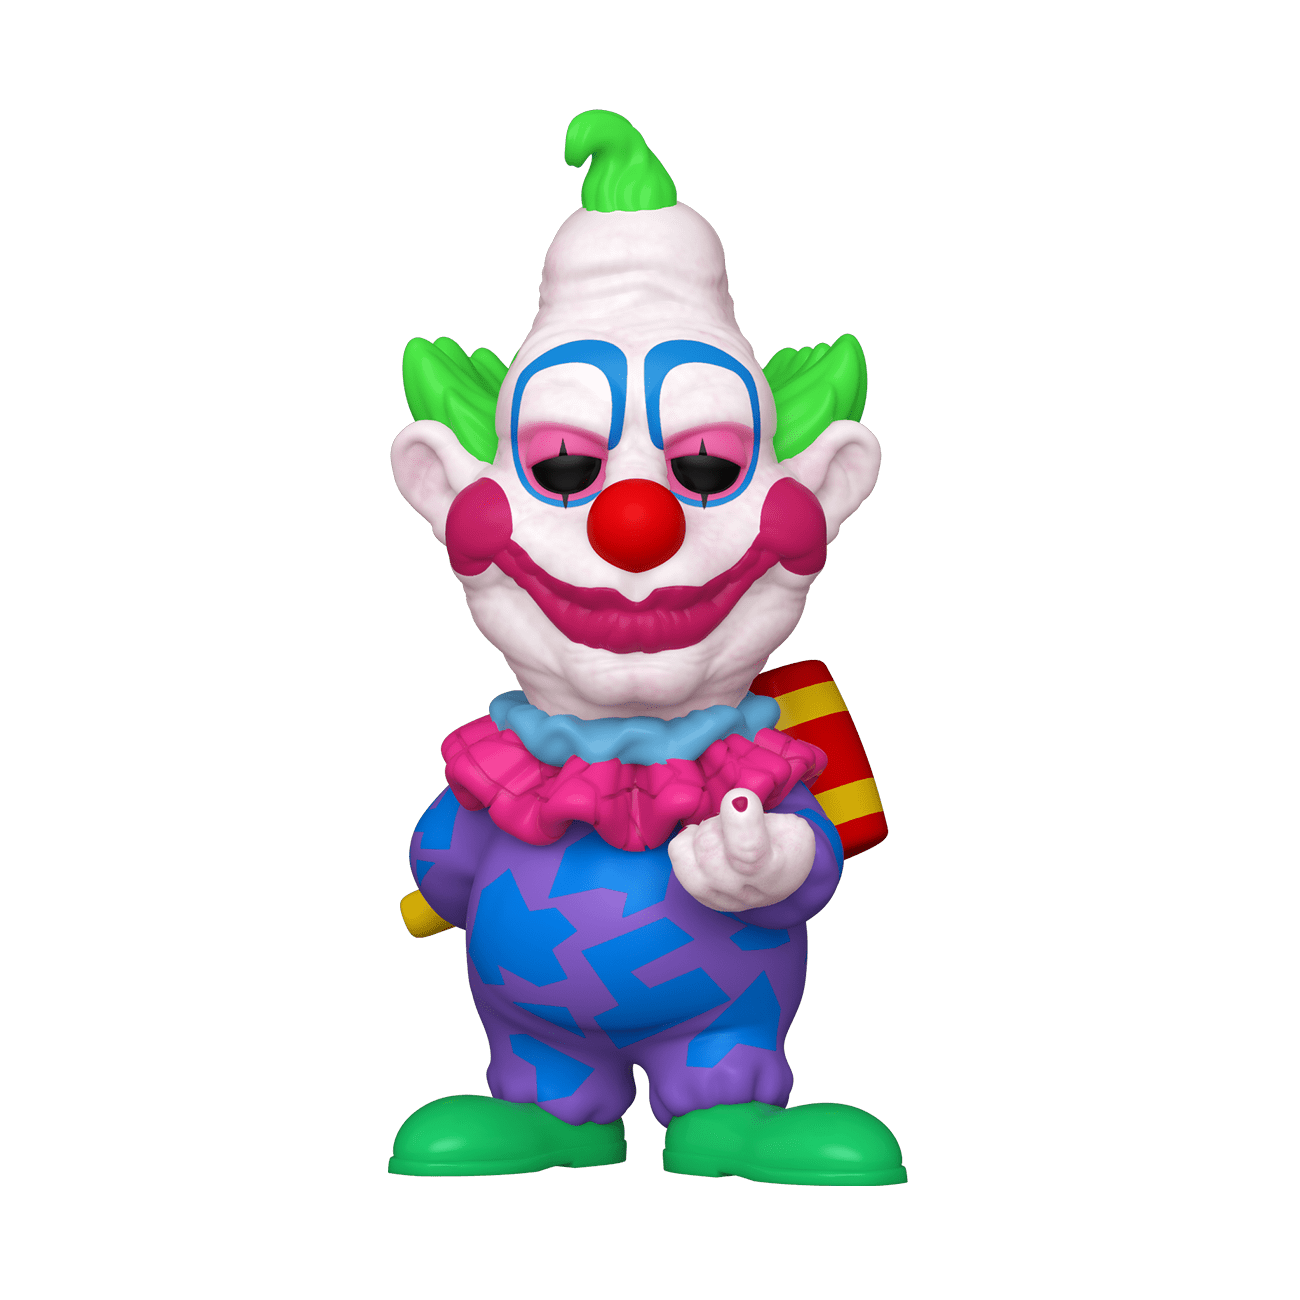 Funko Pop Jumbo Vinyl Figure for sale online Killer Klowns from Outer Space Movies 